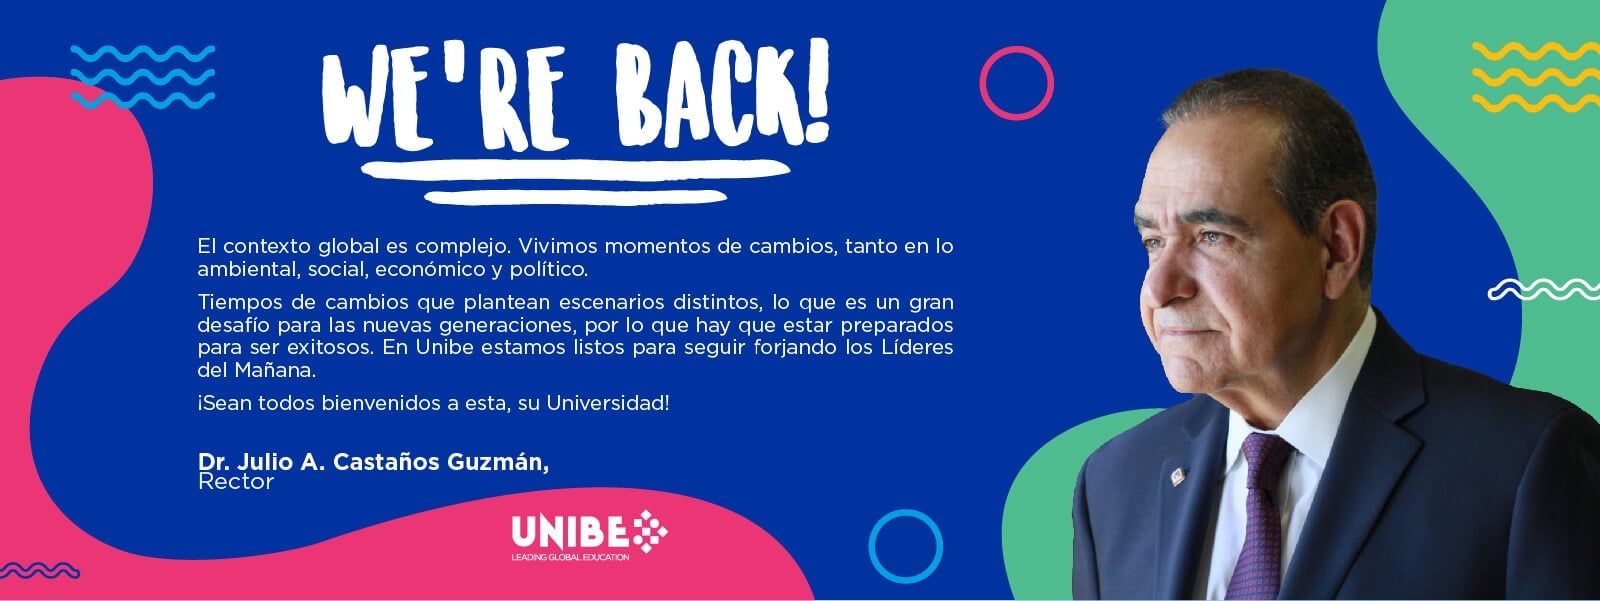 We are back – UNIBE